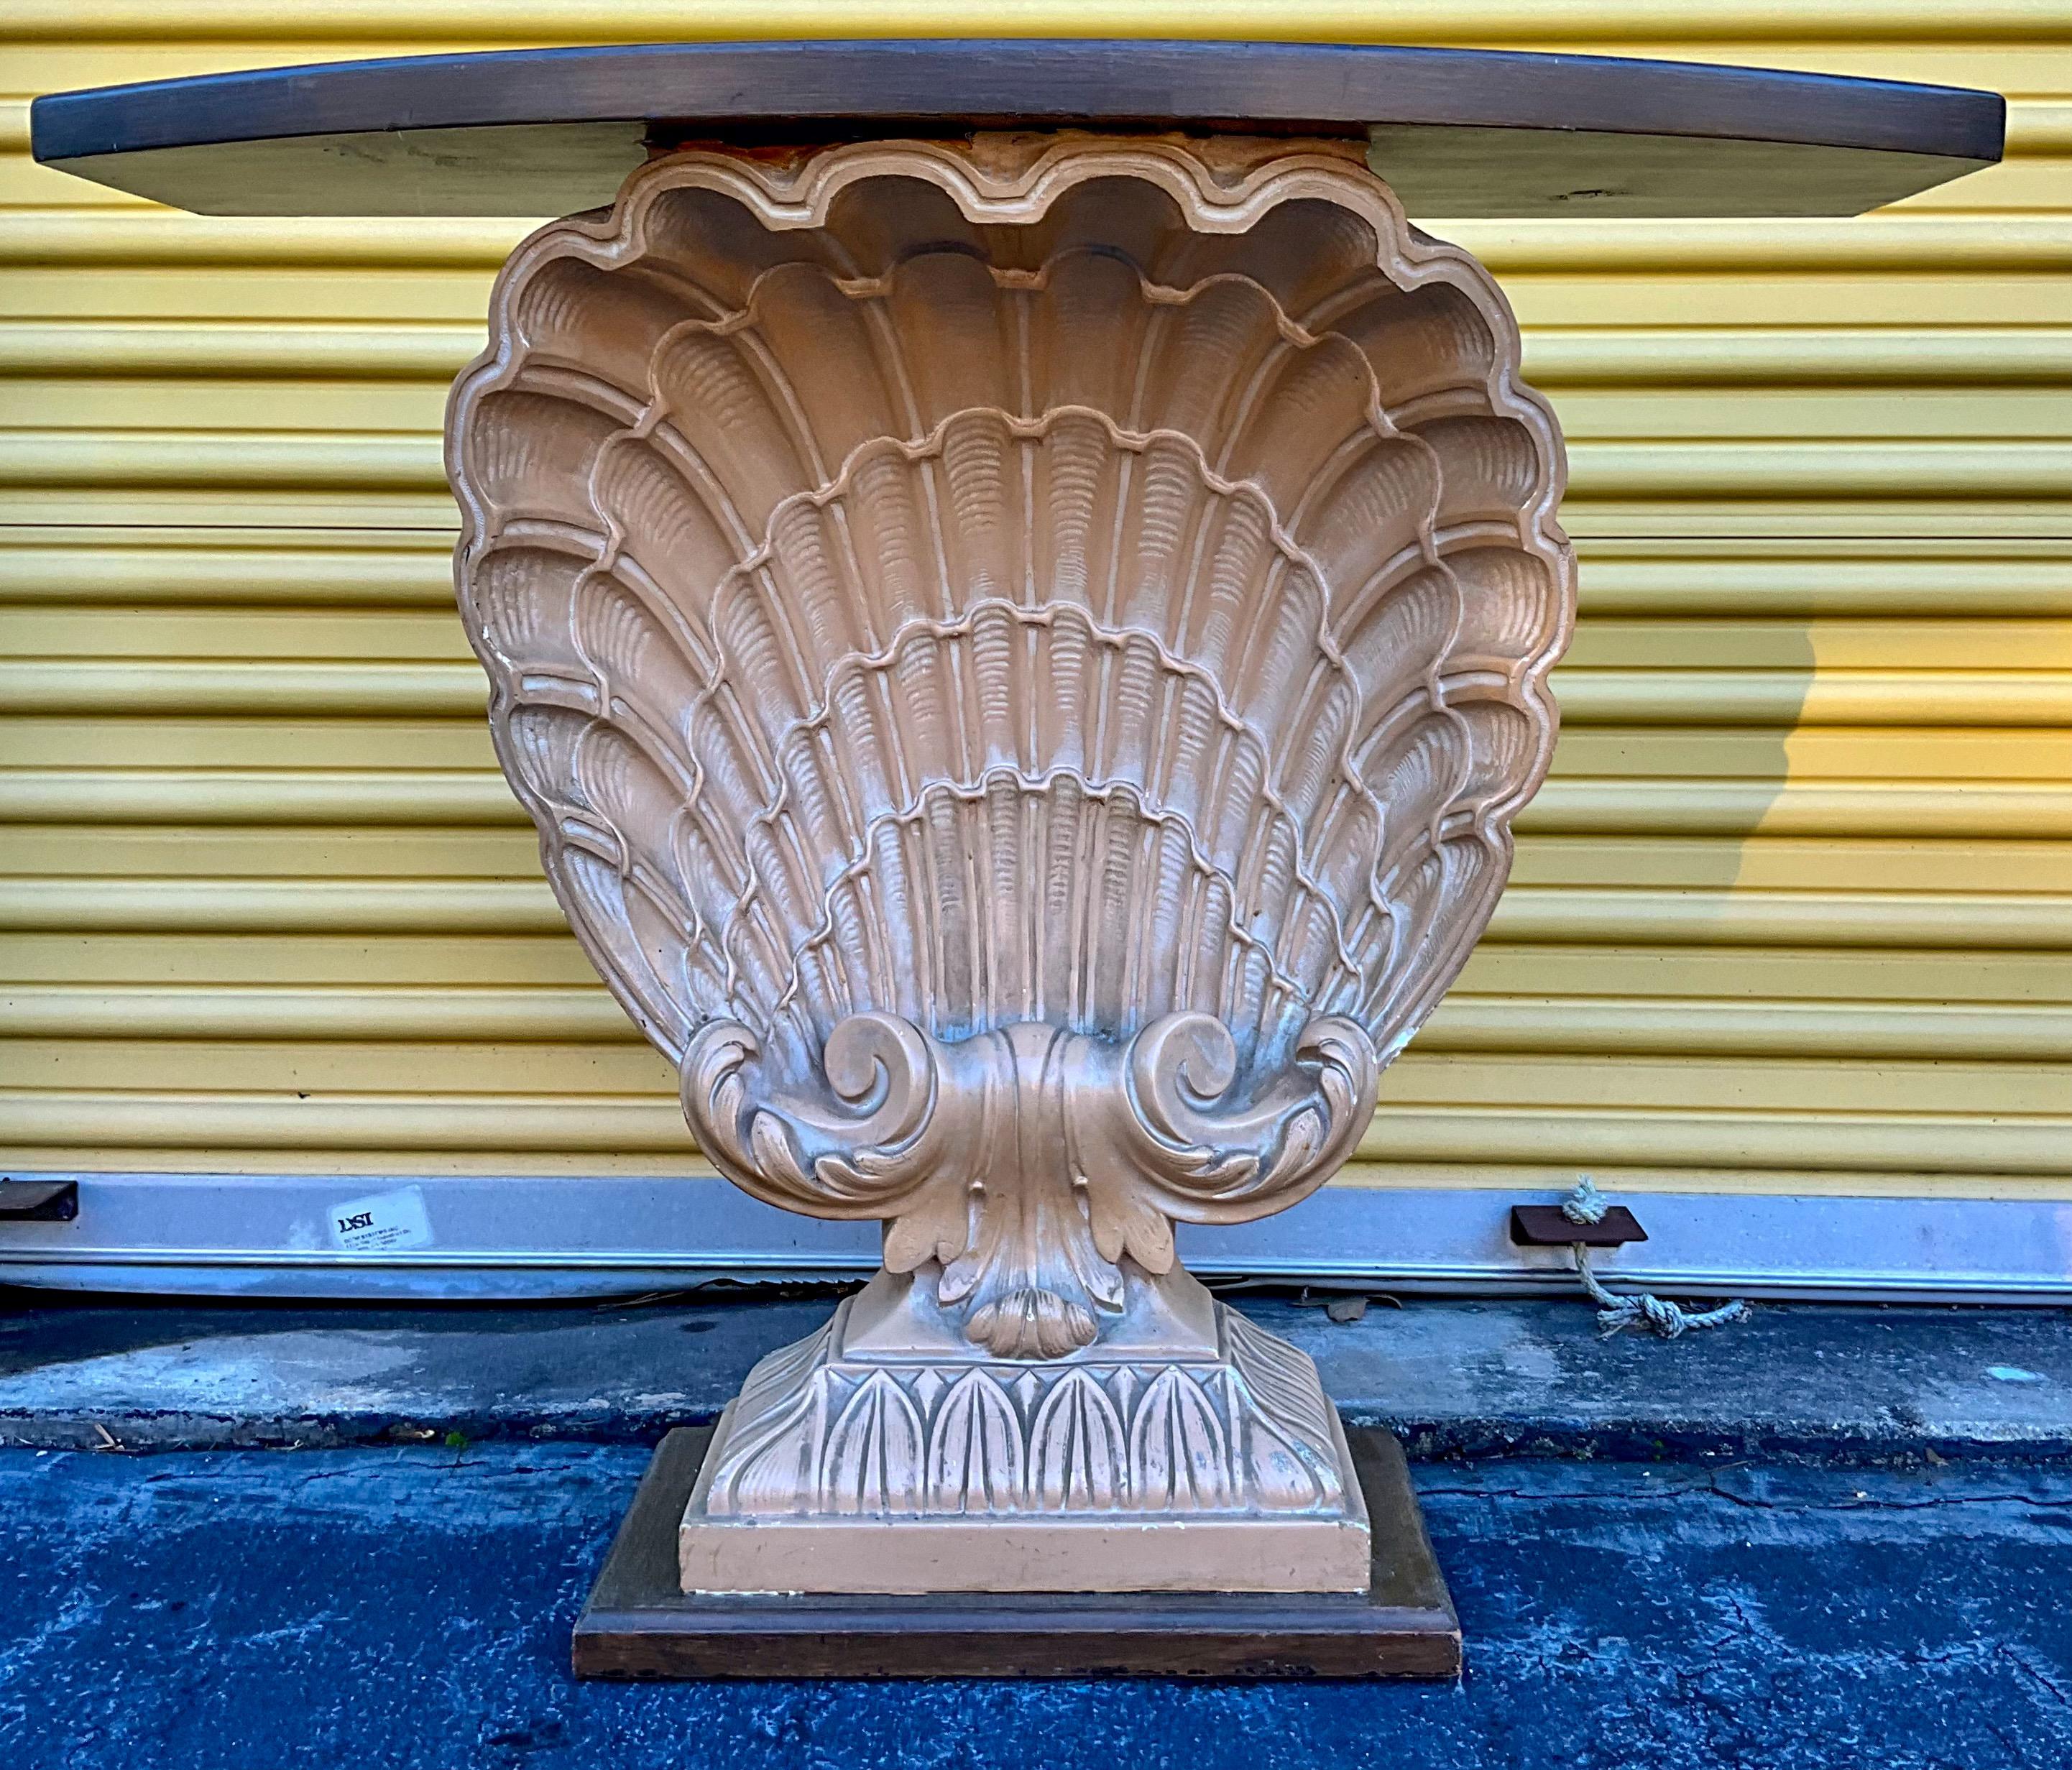 This is a Hollywood Regency Era shell form console table with grotto styling. The shell is cast plaster with a wood top. It is unmarked but an iconic piece for the manufacturer, Grosfeld House. It has lite age wear that doesn’t detract from the